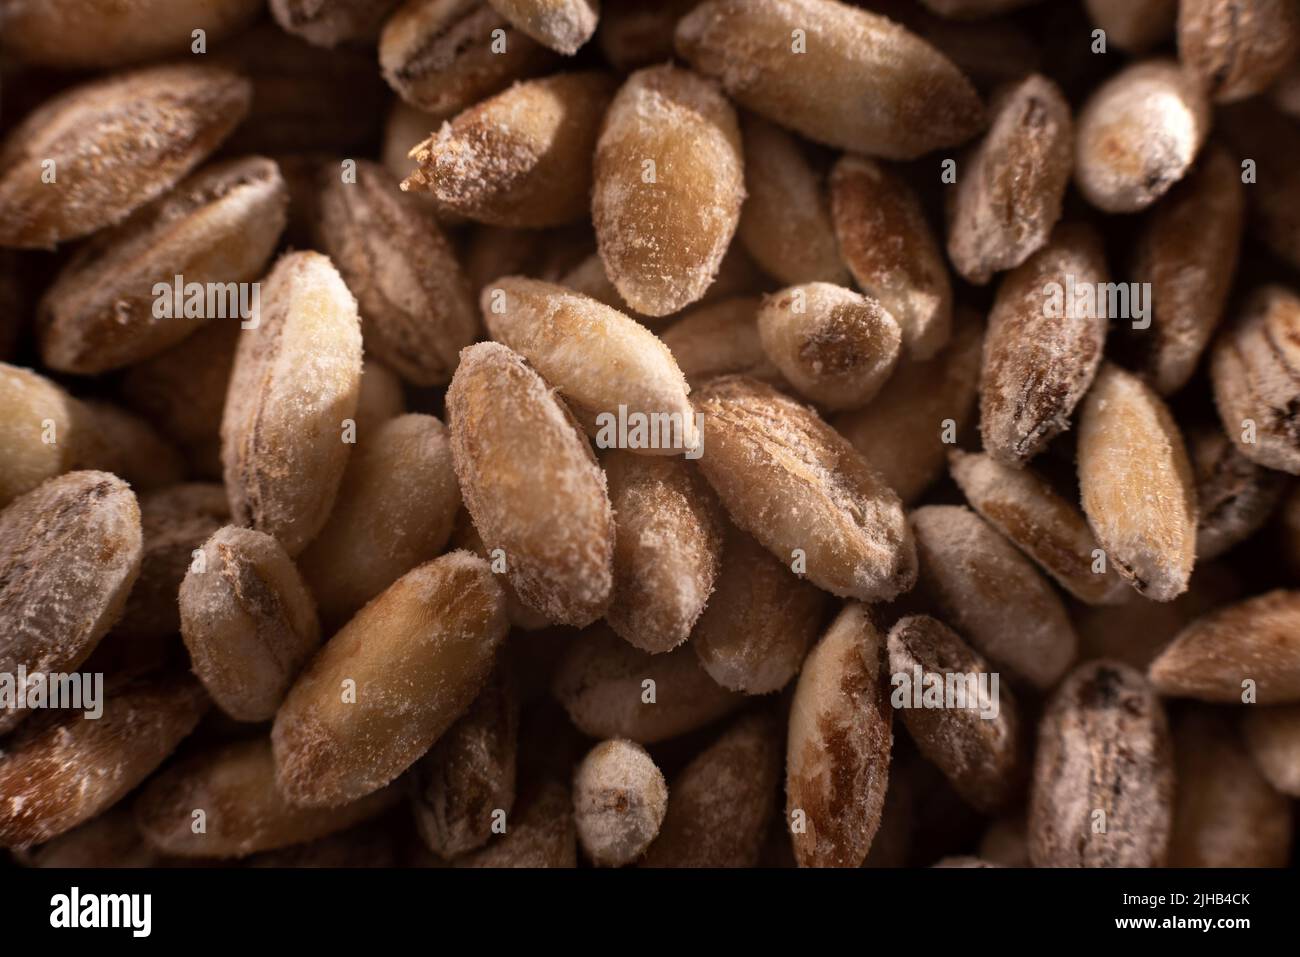 A bunch of barley. Healthy Ancient grain food. Extreme closeup Stock Photo